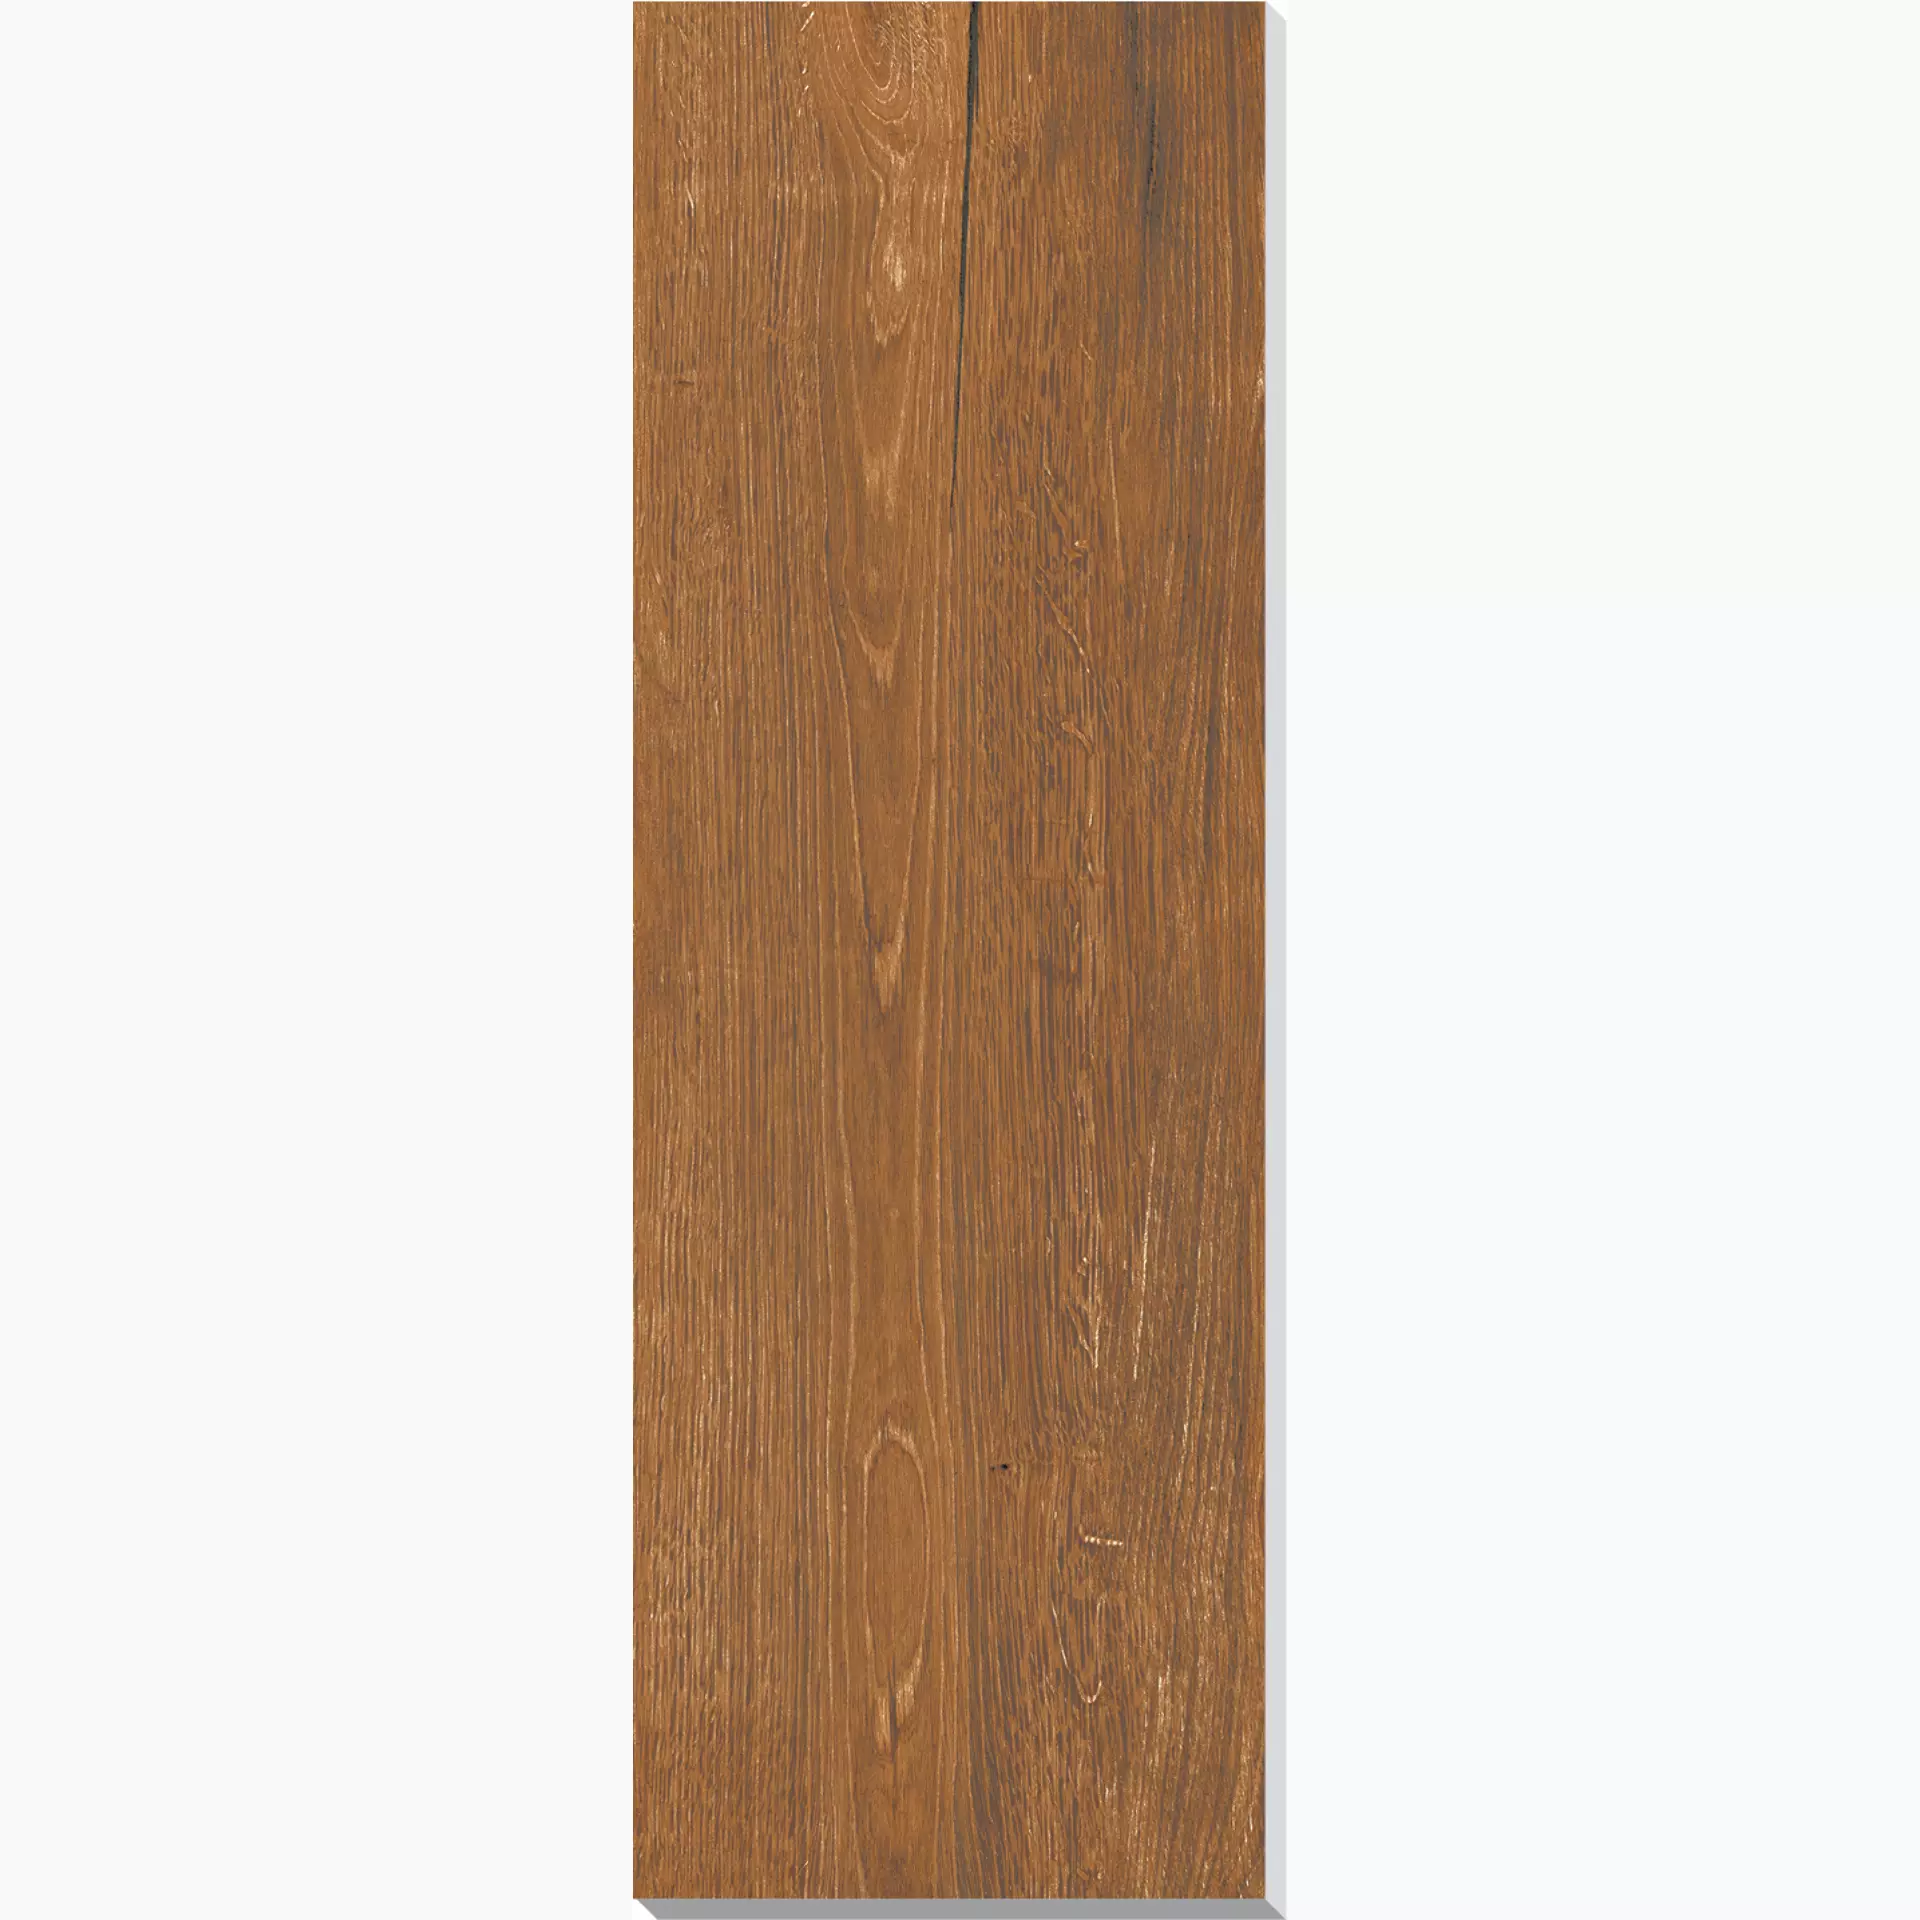 Novabell Artwood Cherry Outwalk – Naturale AWD52RT 40x120cm rectified 20mm